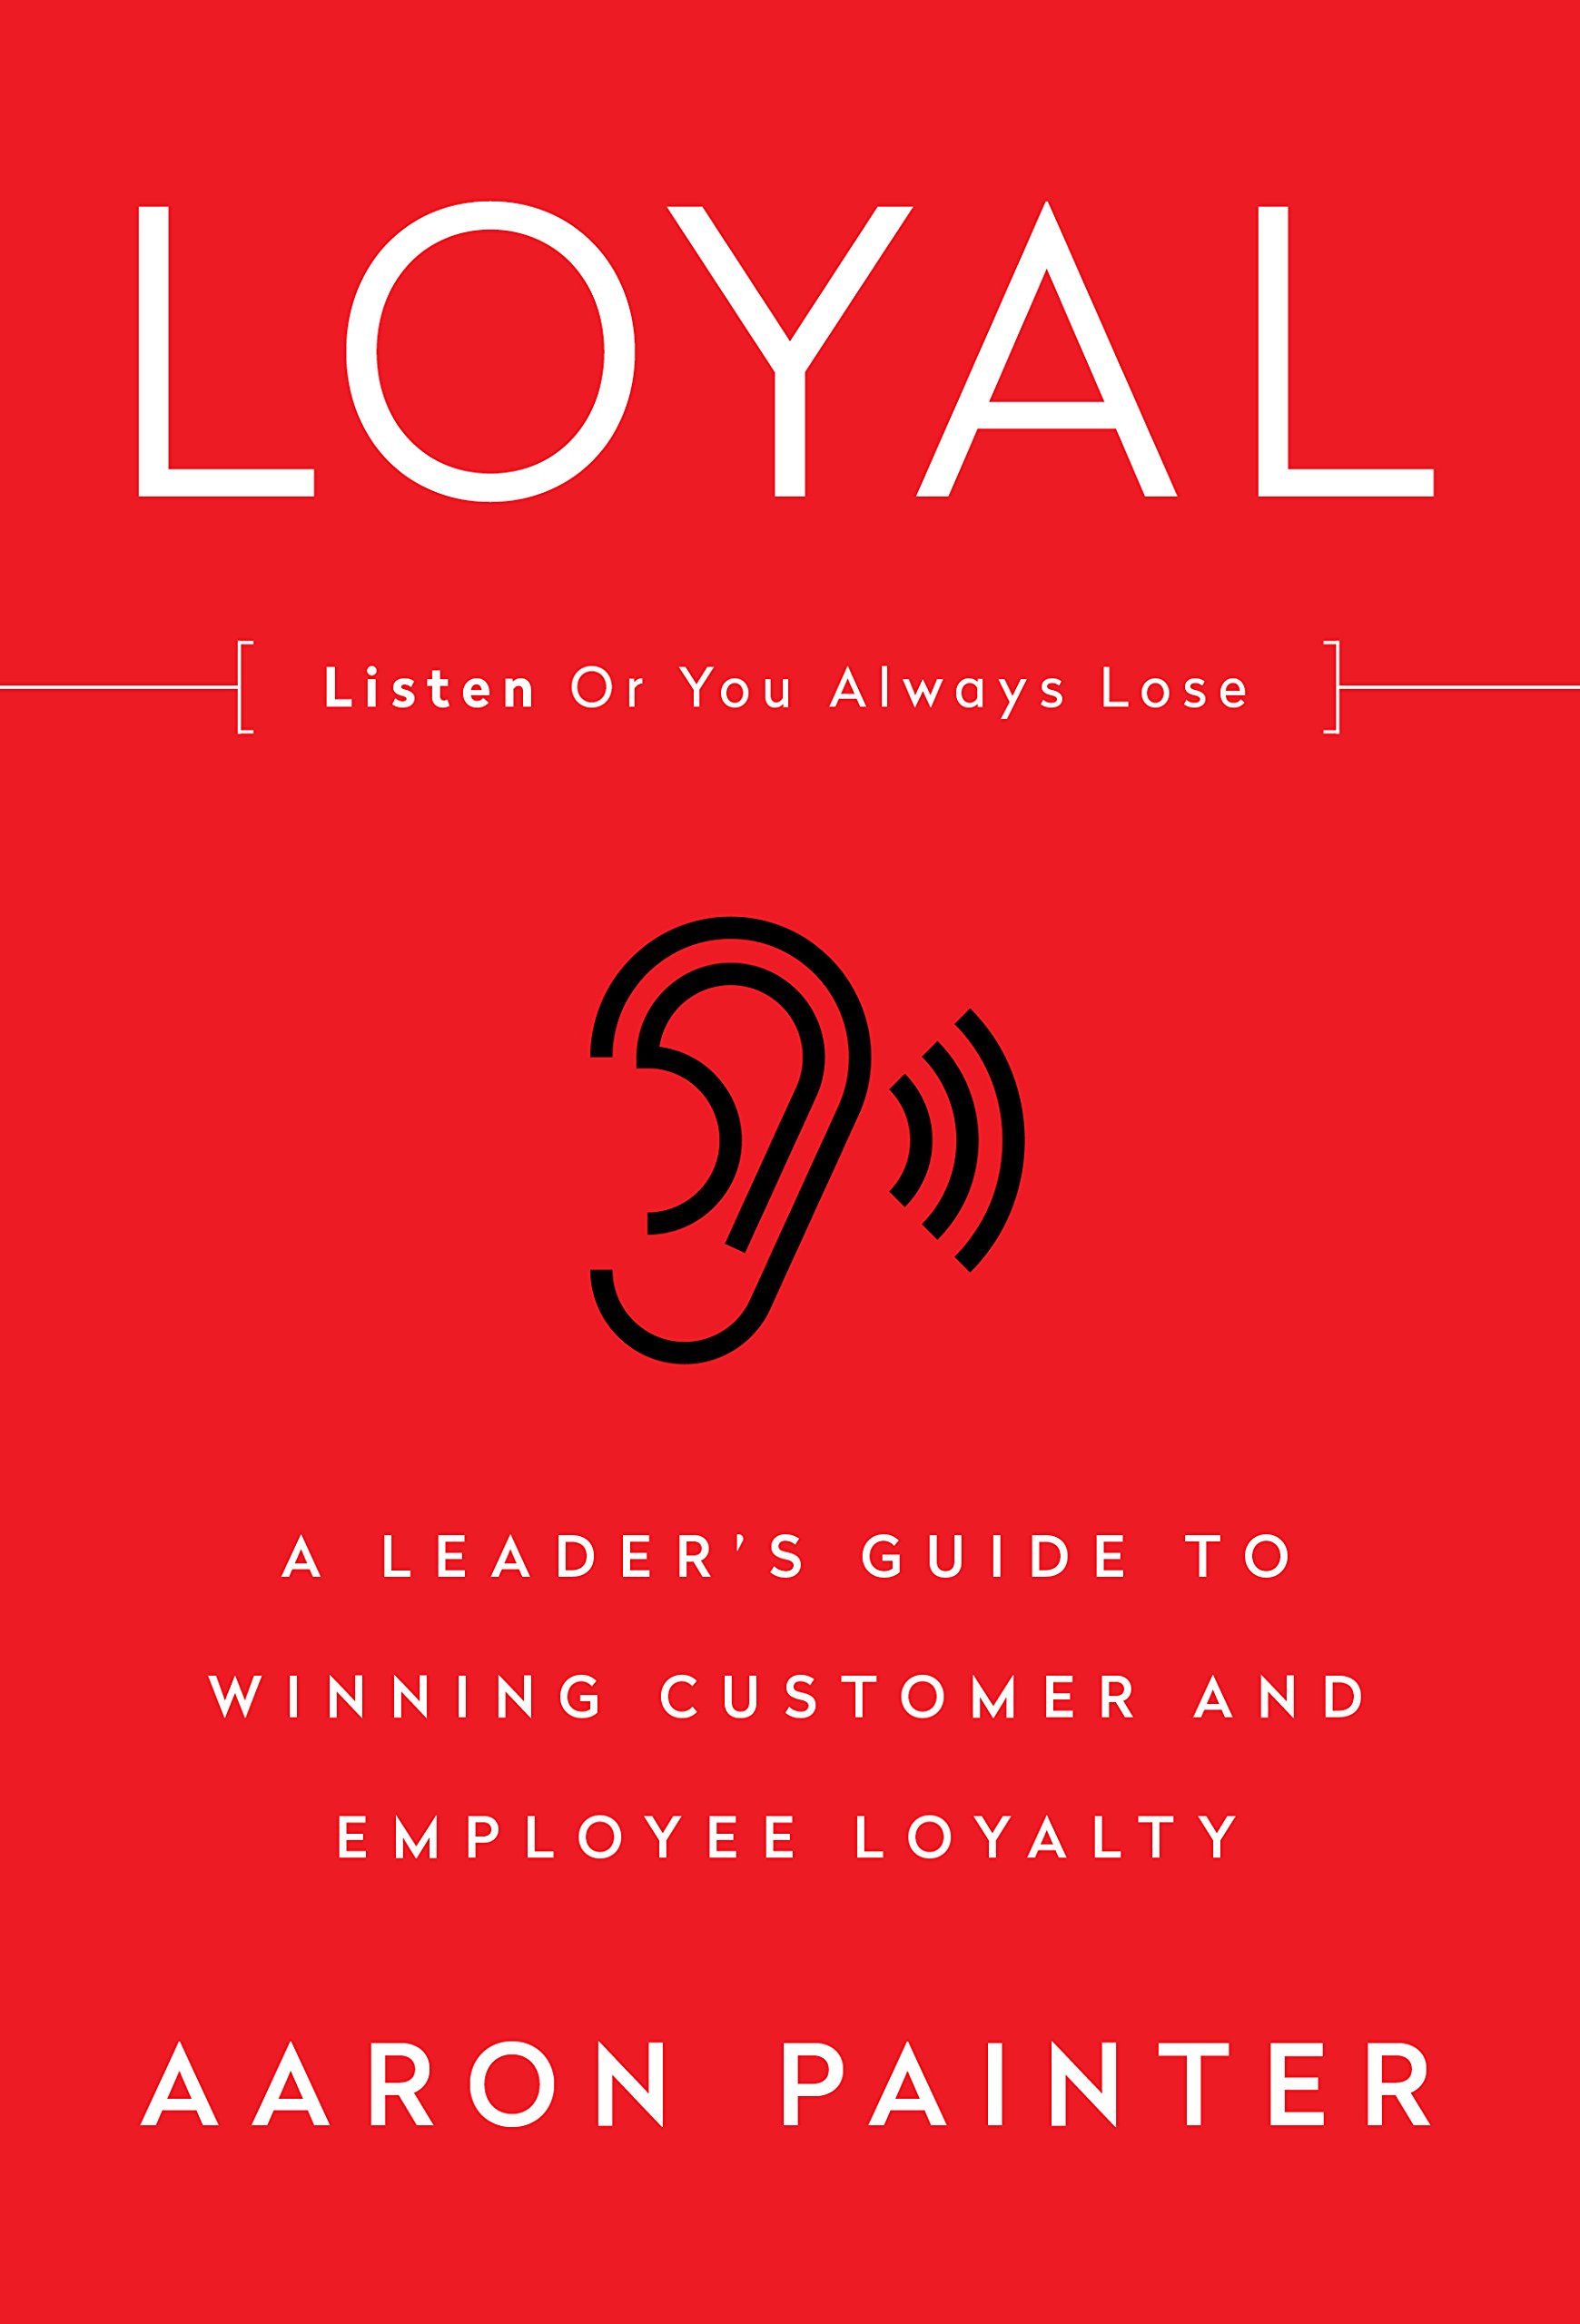 LOYAL: A Leader's Guide to Winning Customer and Employee Loyalty ...